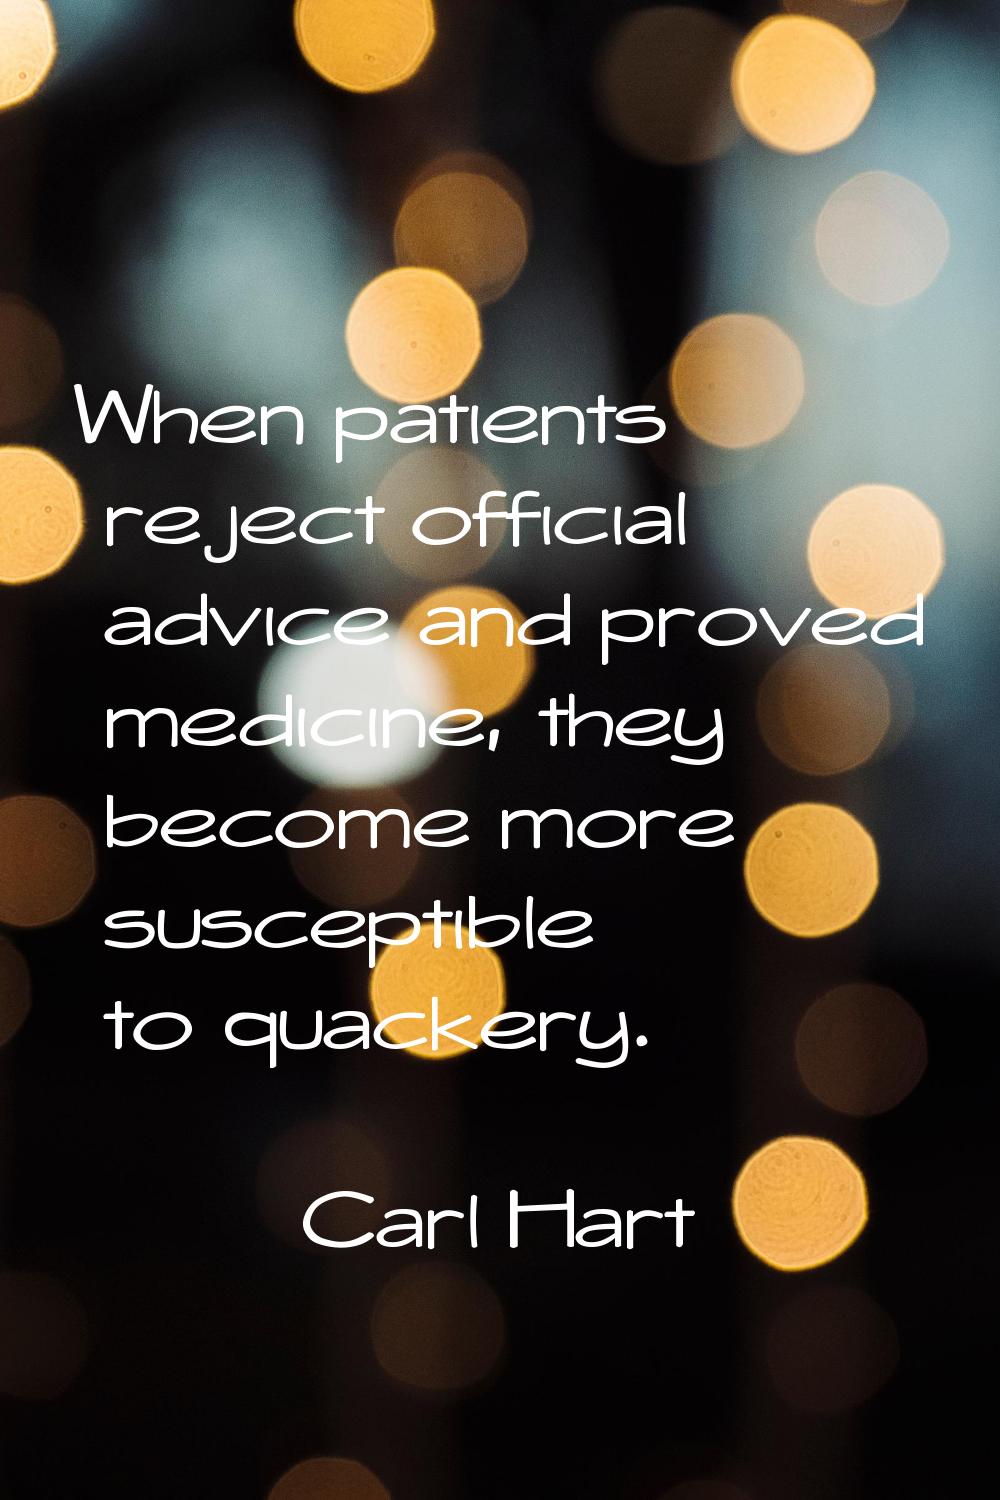 When patients reject official advice and proved medicine, they become more susceptible to quackery.